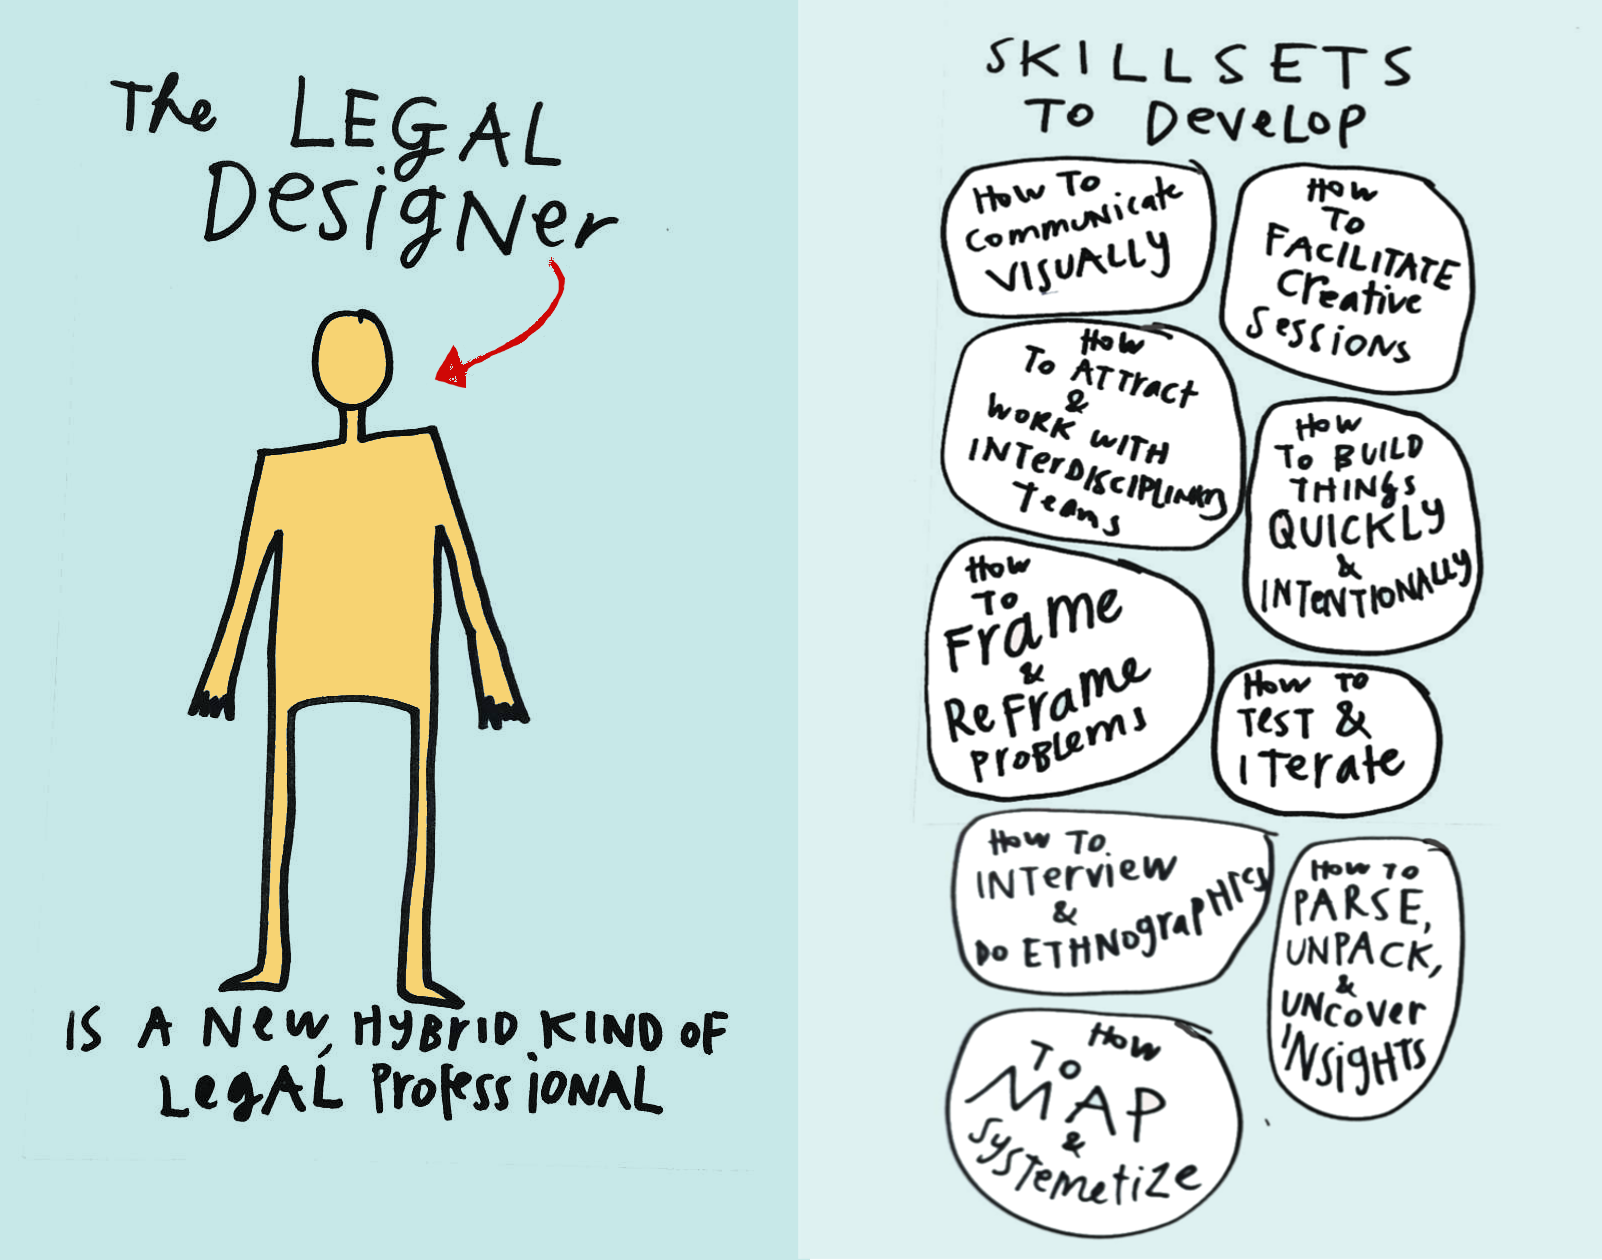 Legal Designers - A New Kind of Legal Professional